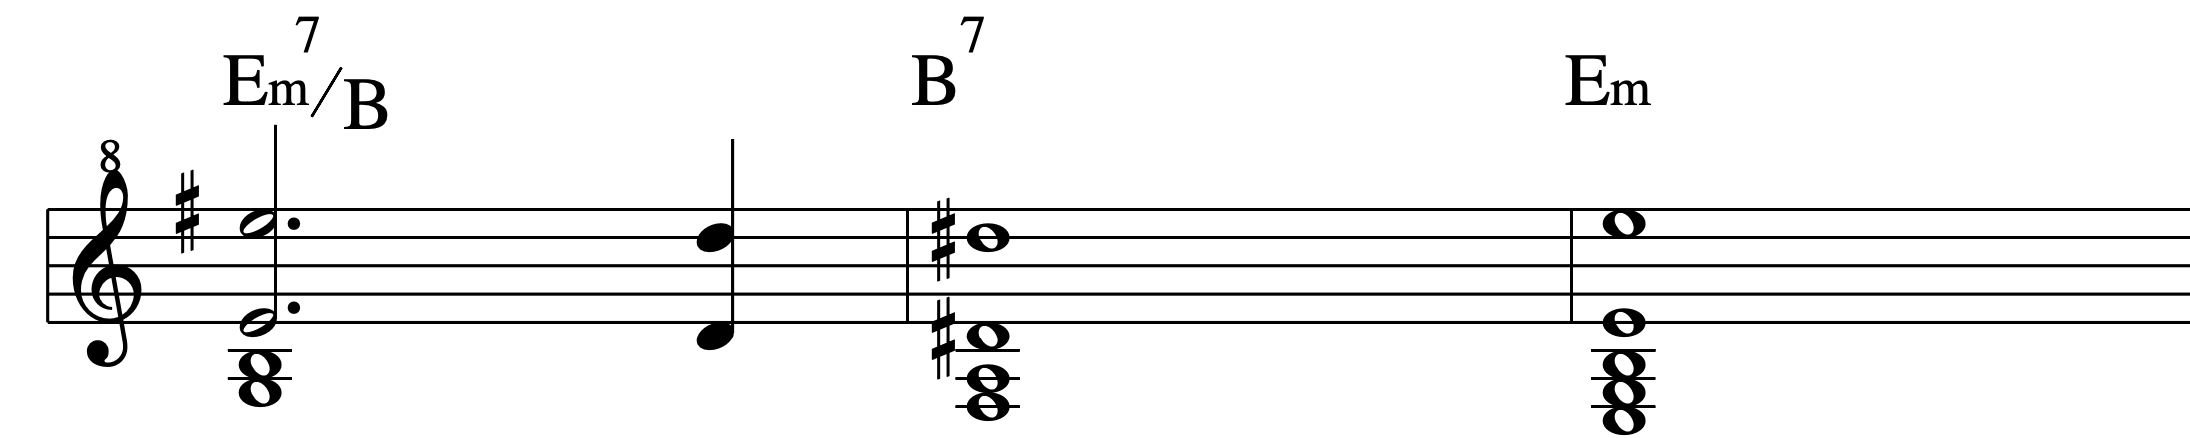 Showing the cadential progression in the strings